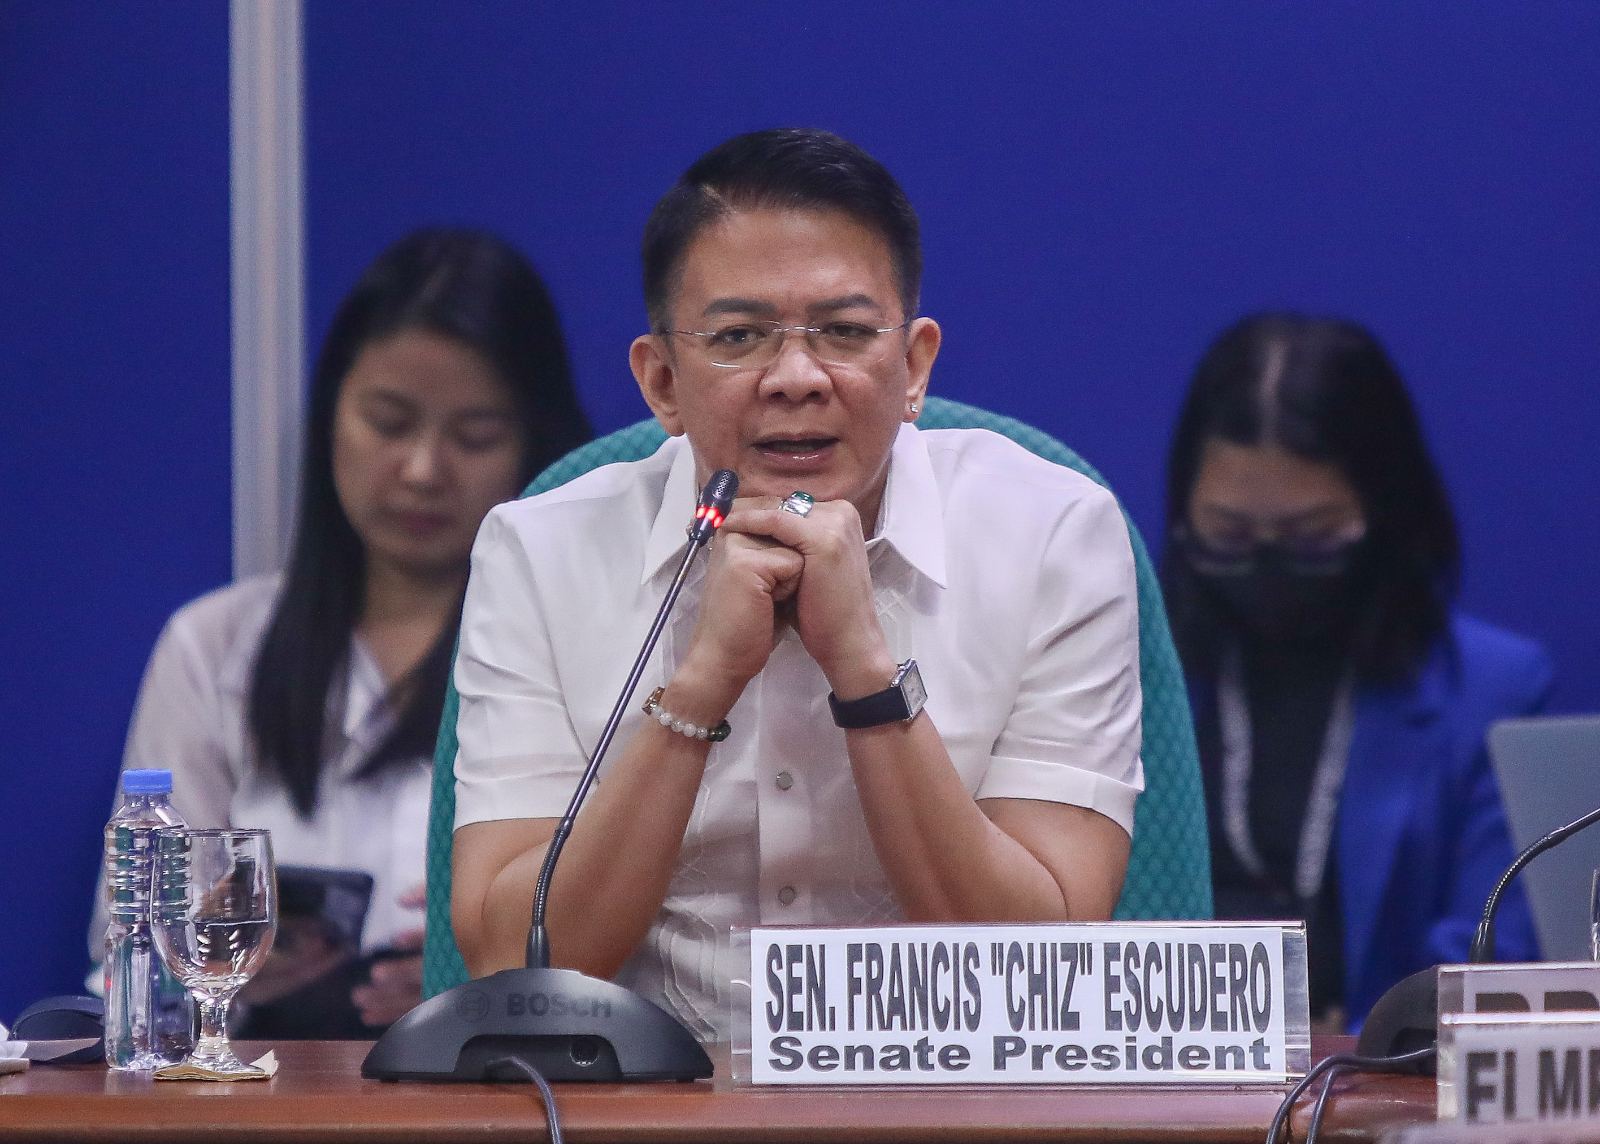 Senate President Chiz Escudero called on the national government to refrain from meddling with elections in the Bangsamoro Autonomous Region in Muslim Mindanao (BARMM). 